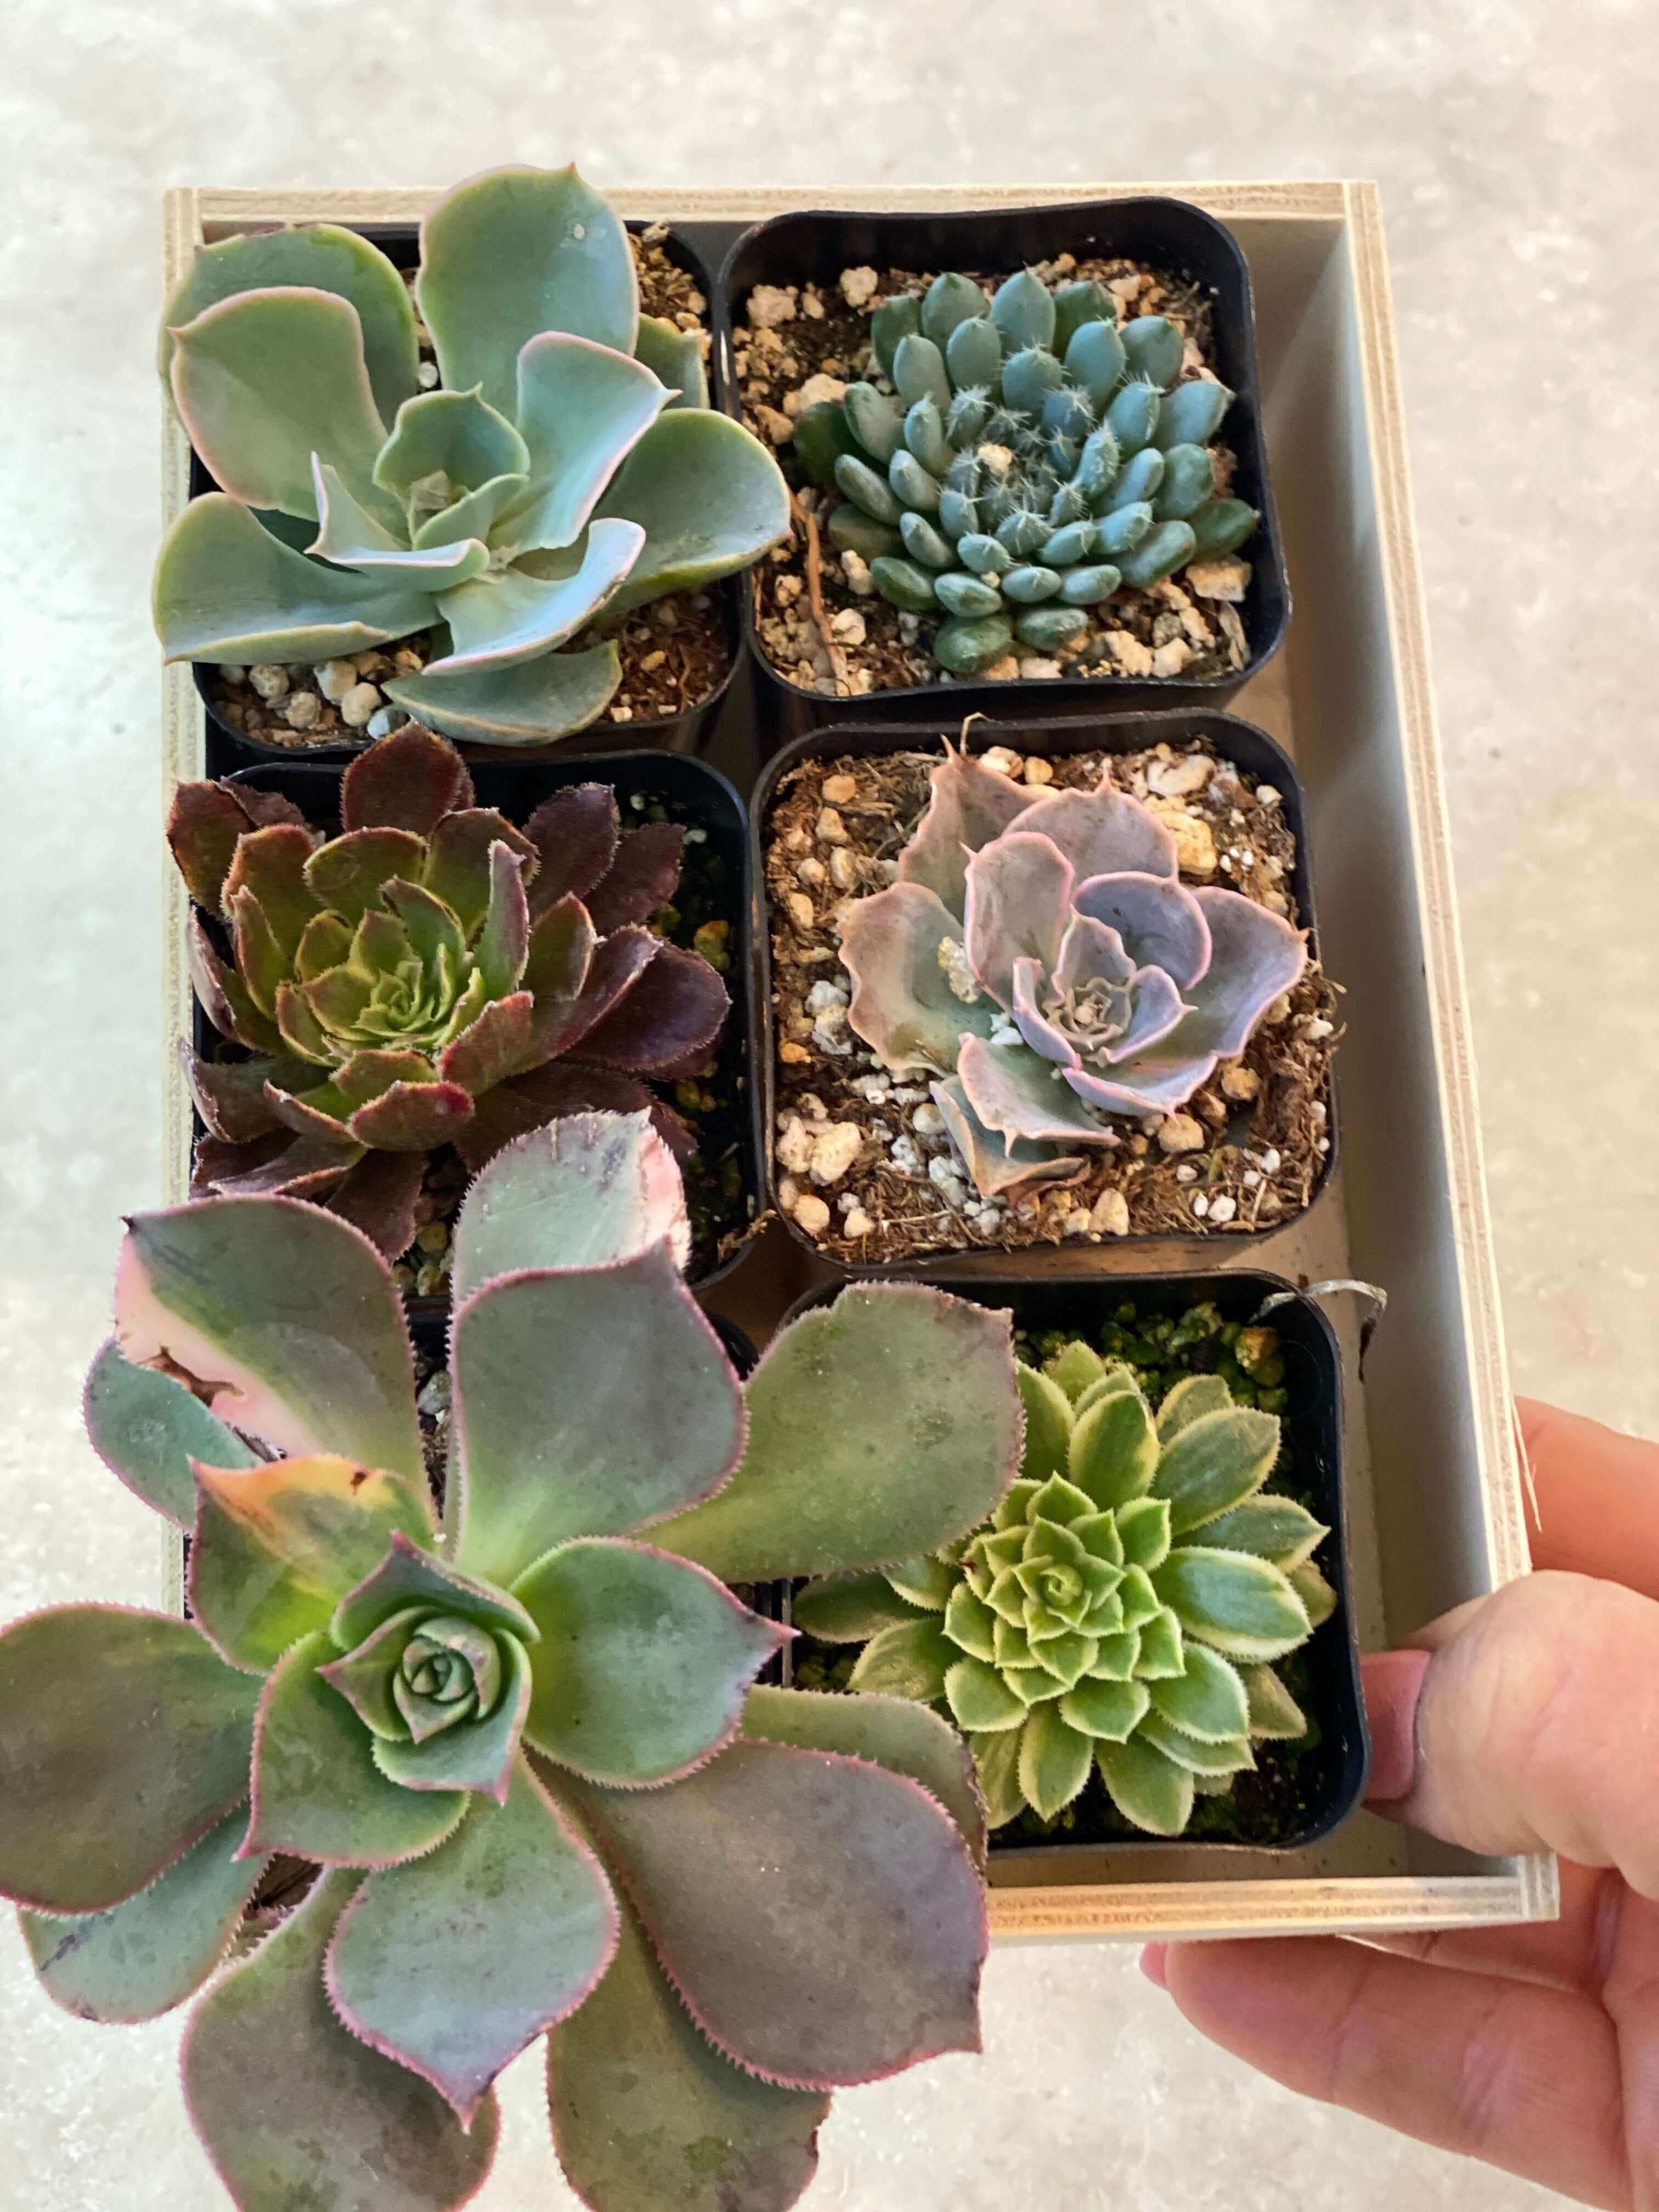 Six-pack of miniature succulents, each plant distinct with varied leaf shapes and textures.